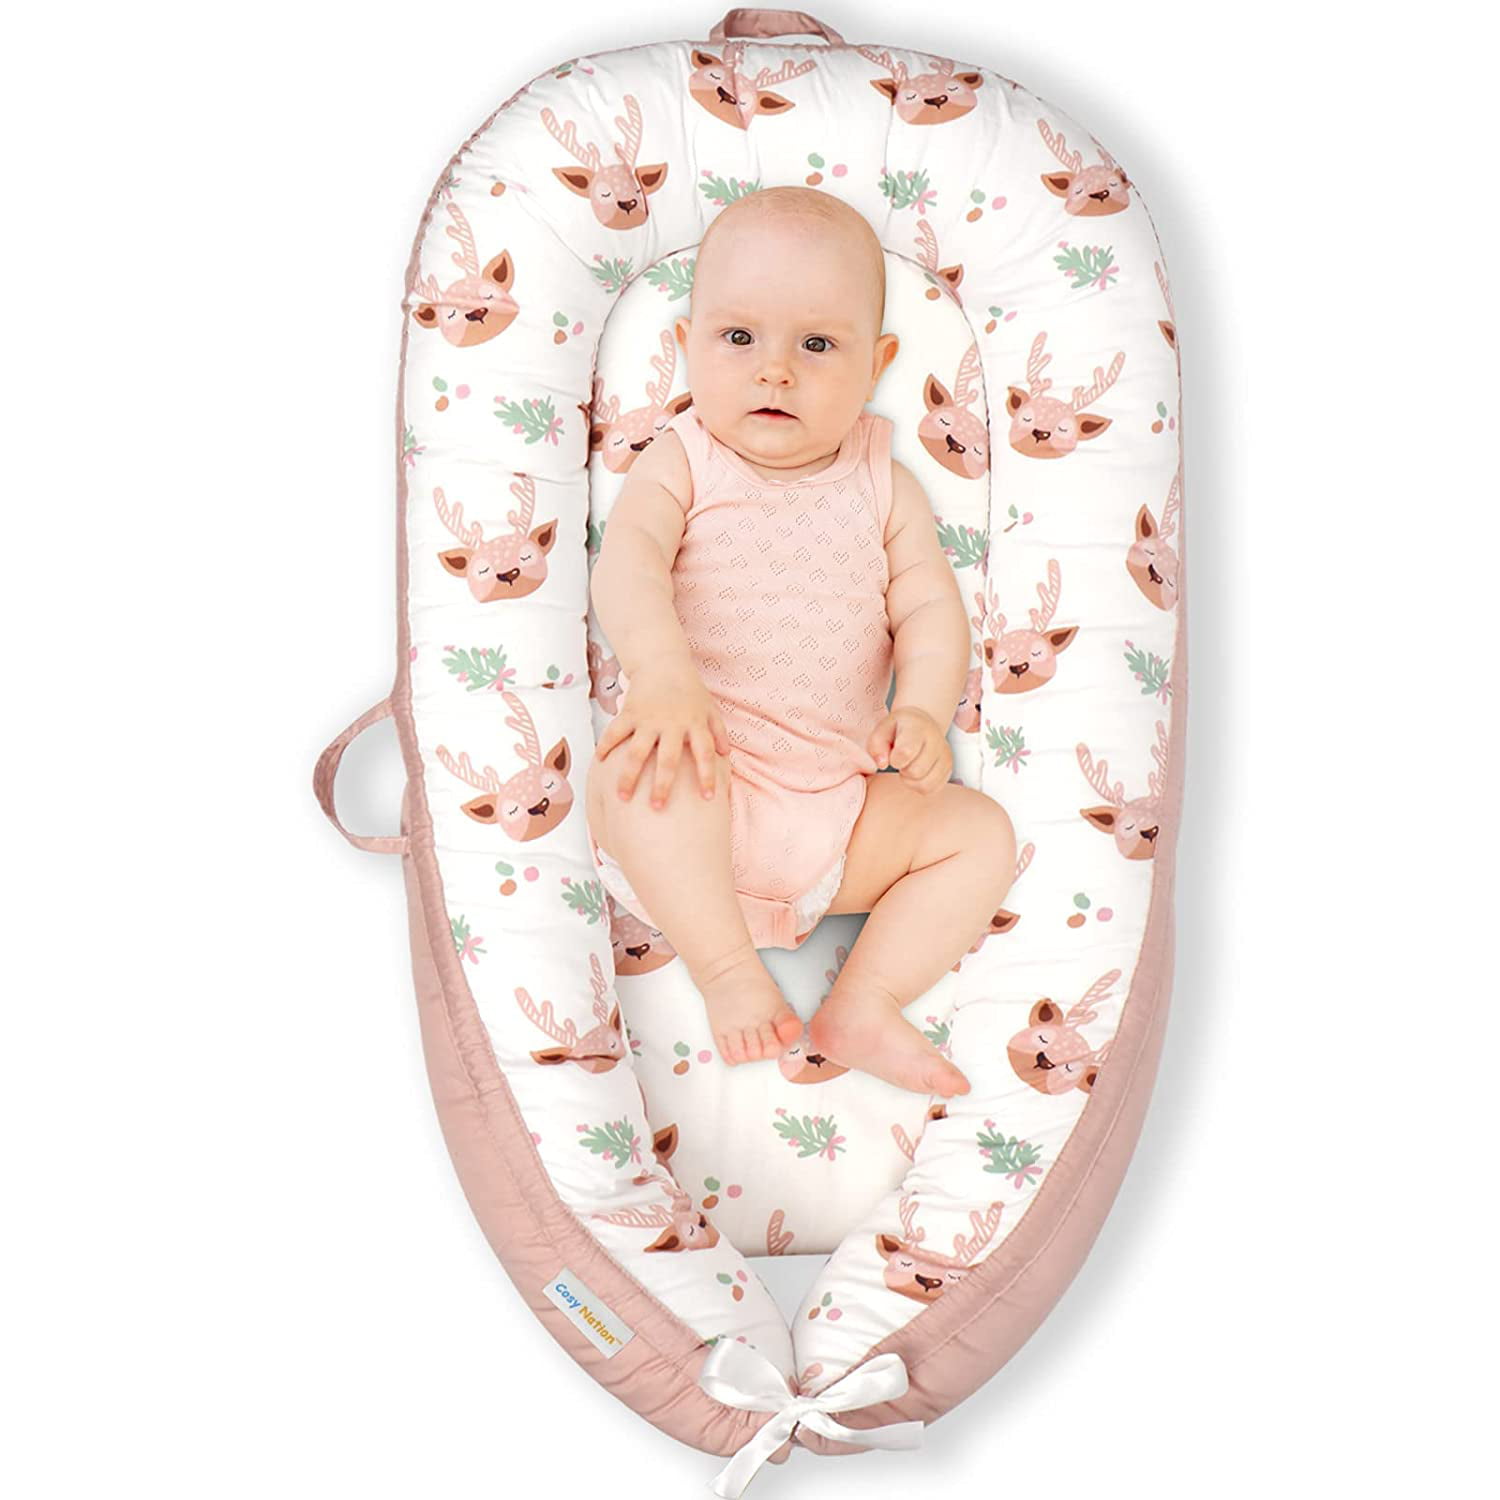 Baby Lounger Newborn Nest for Co-Sleeping Soft Breathable Cotton Portable Baby Bassinet for Traveling and Napping Rainbow Infant Co Sleeper Suitable for Crib & Bassinet 